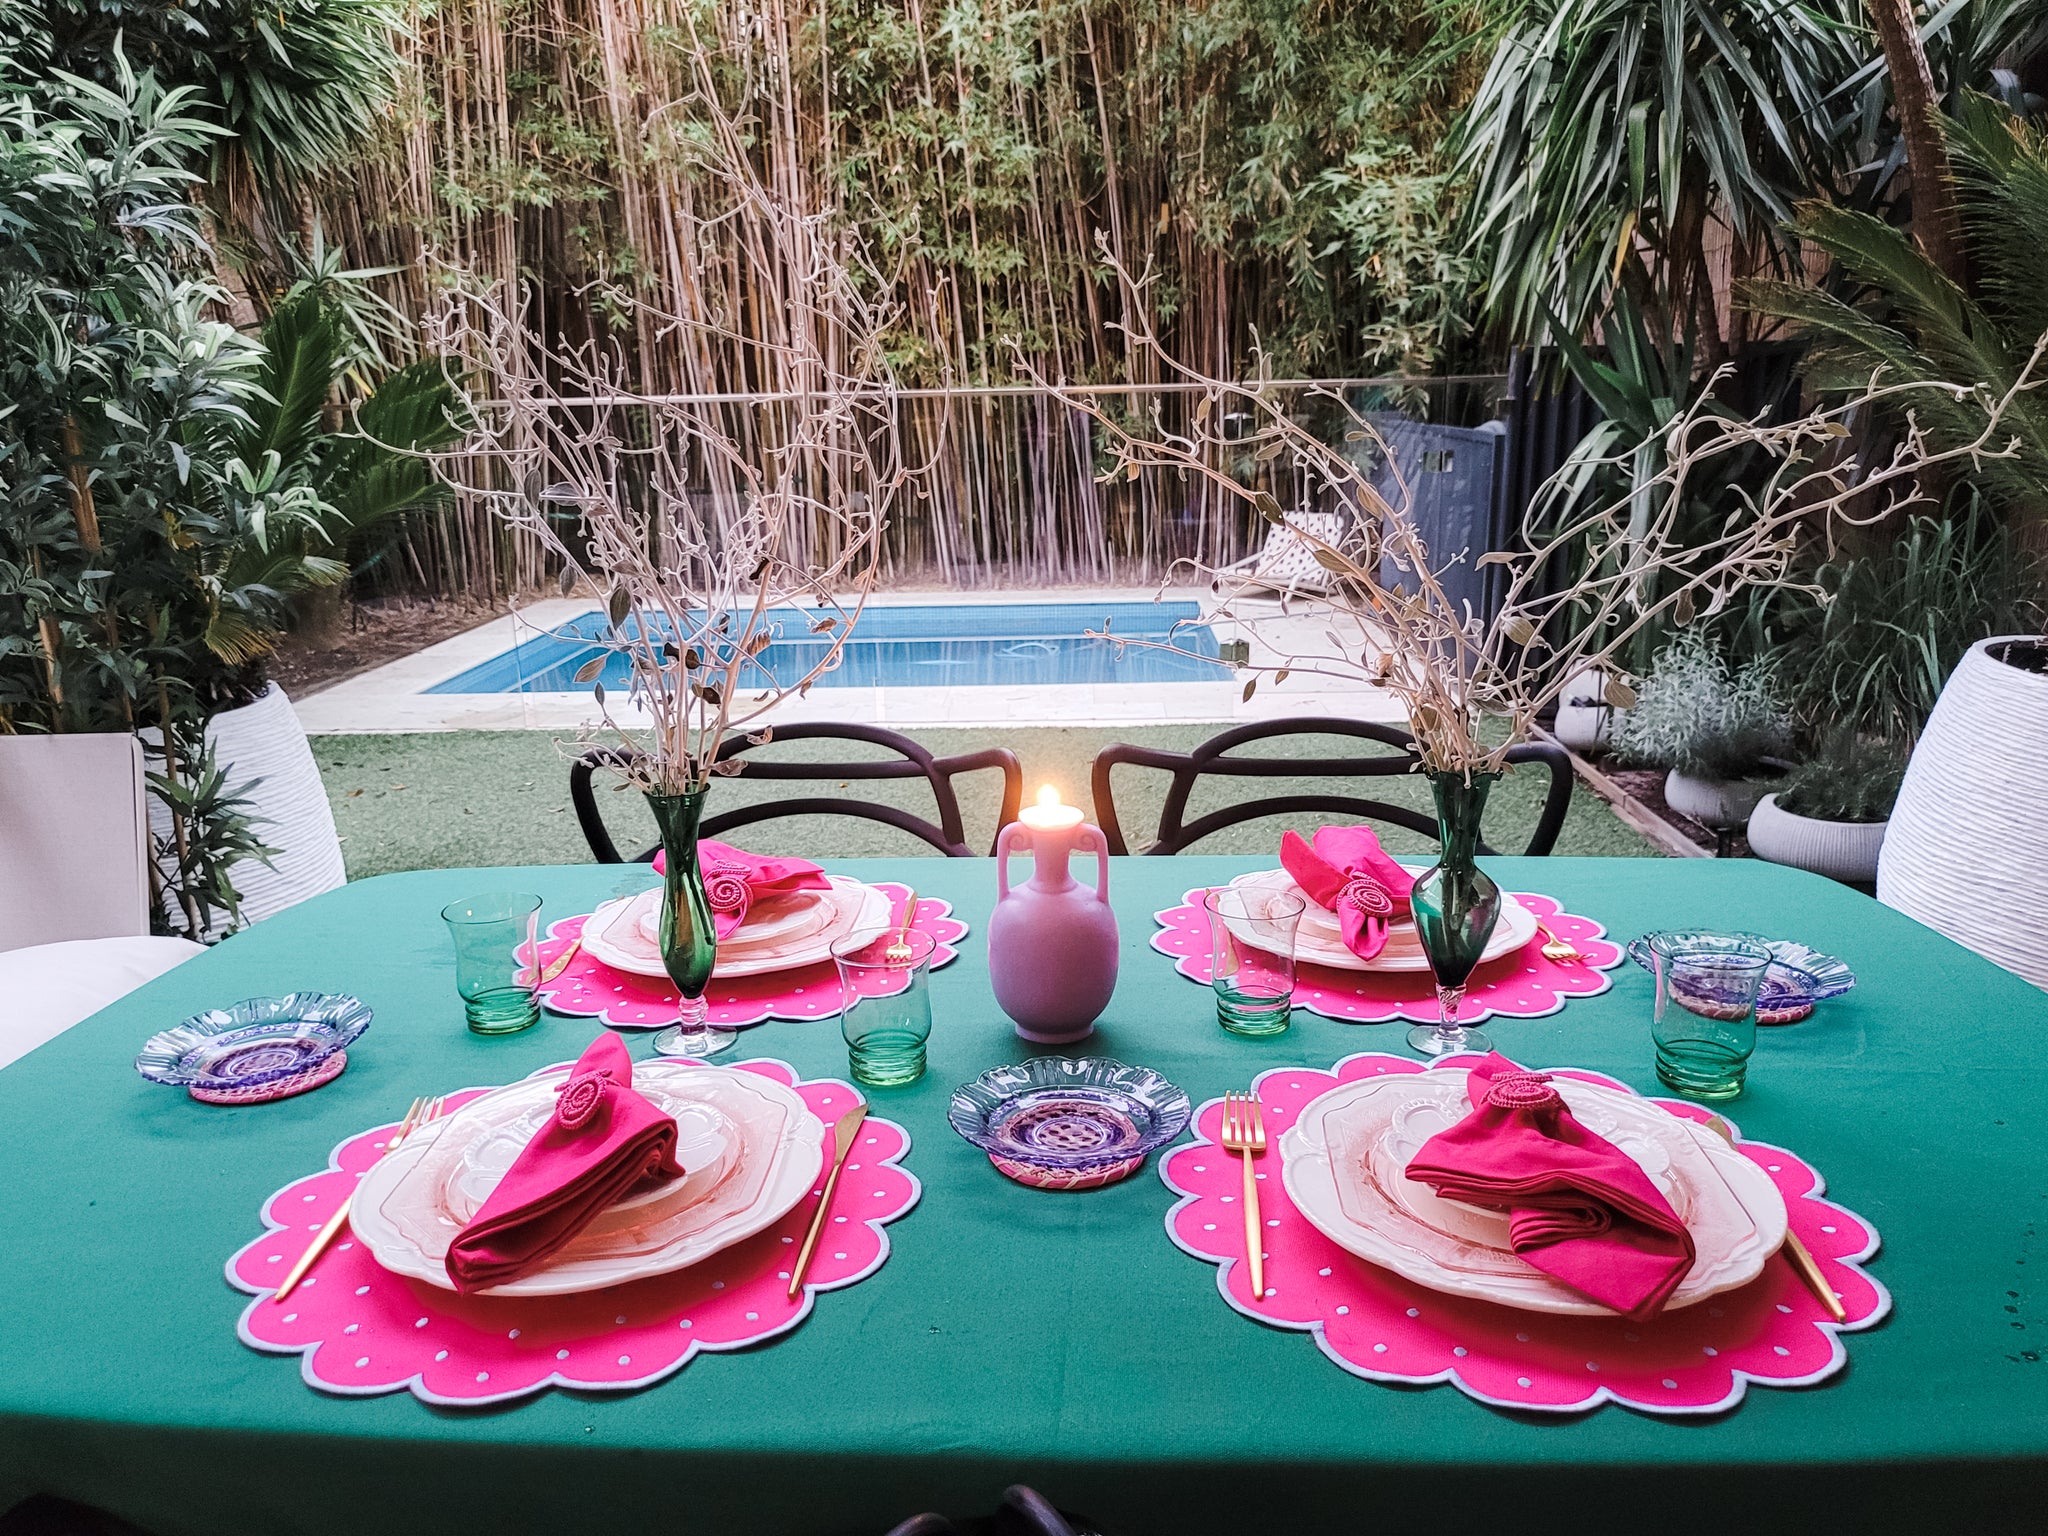 The Clara Collection - bold pink scalloped placemats on an emerald green tablecloth. Pink and green inspired nostalgia from the 70s. Setting the table pretty